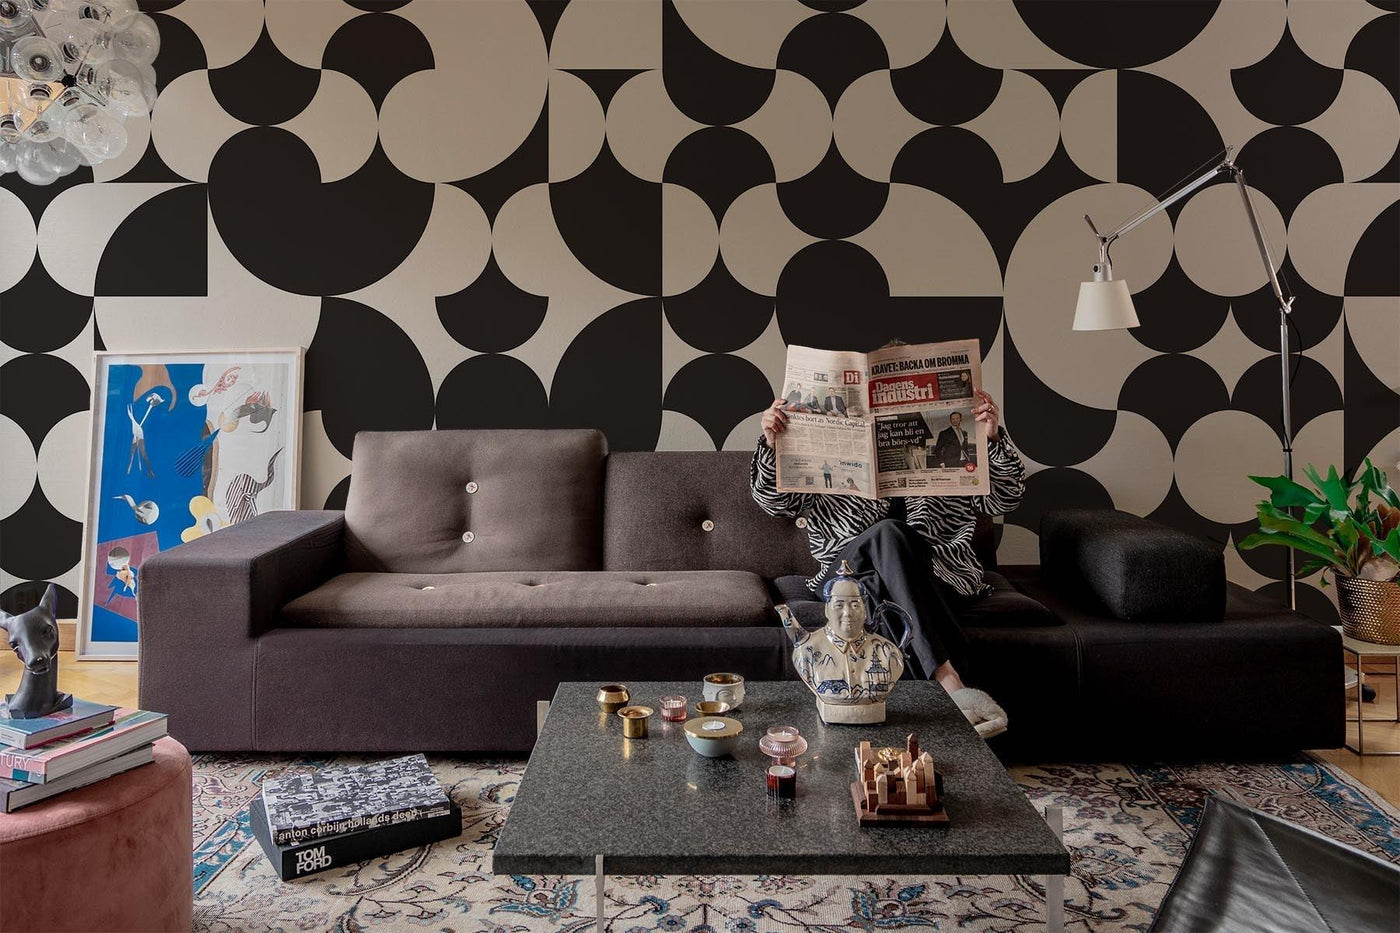 black and white geometric wall mural on the wall of this midcentury inspired living room. Black sofa. Vintage retro rug on the wooden floor. Black marble squared table and a vintage lamp